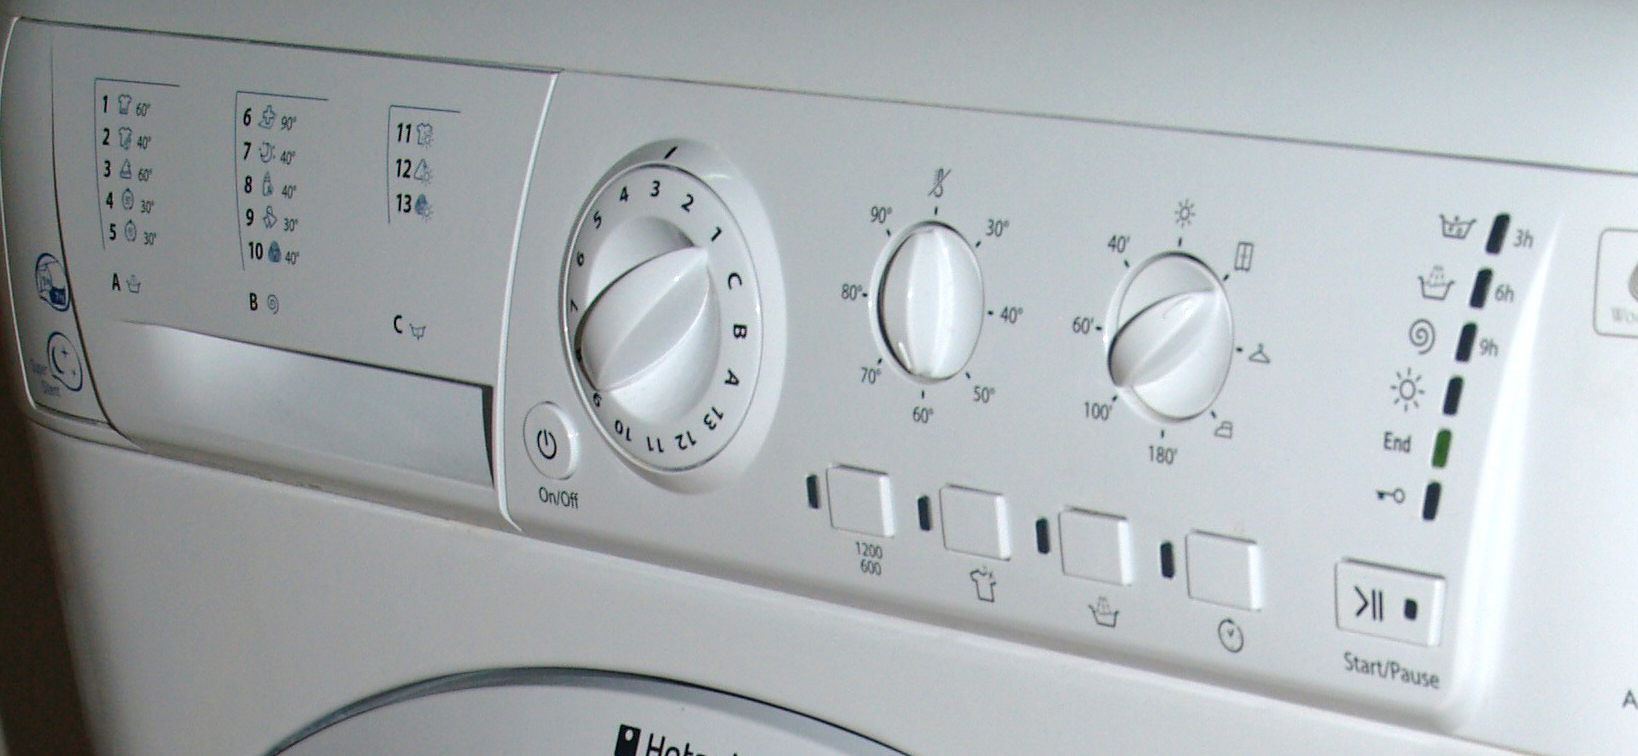 intellisys controller manual for dryer